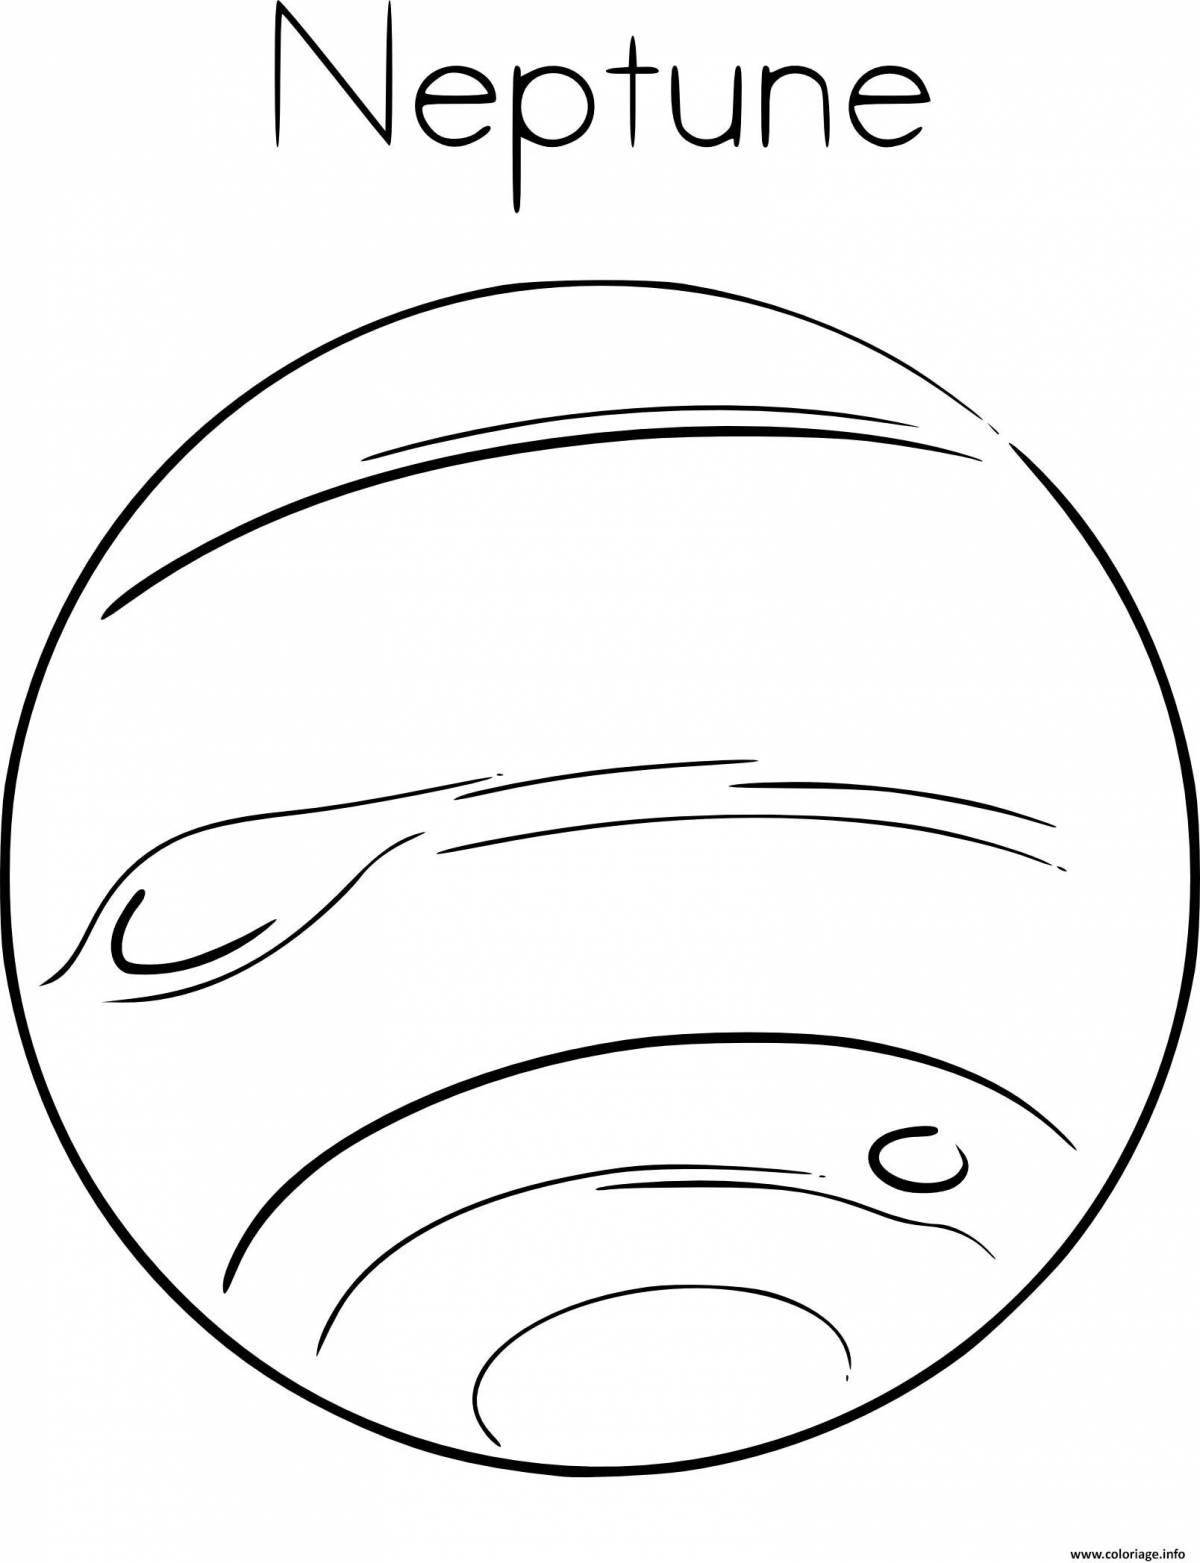 Gorgeous jupiter coloring pages for kids